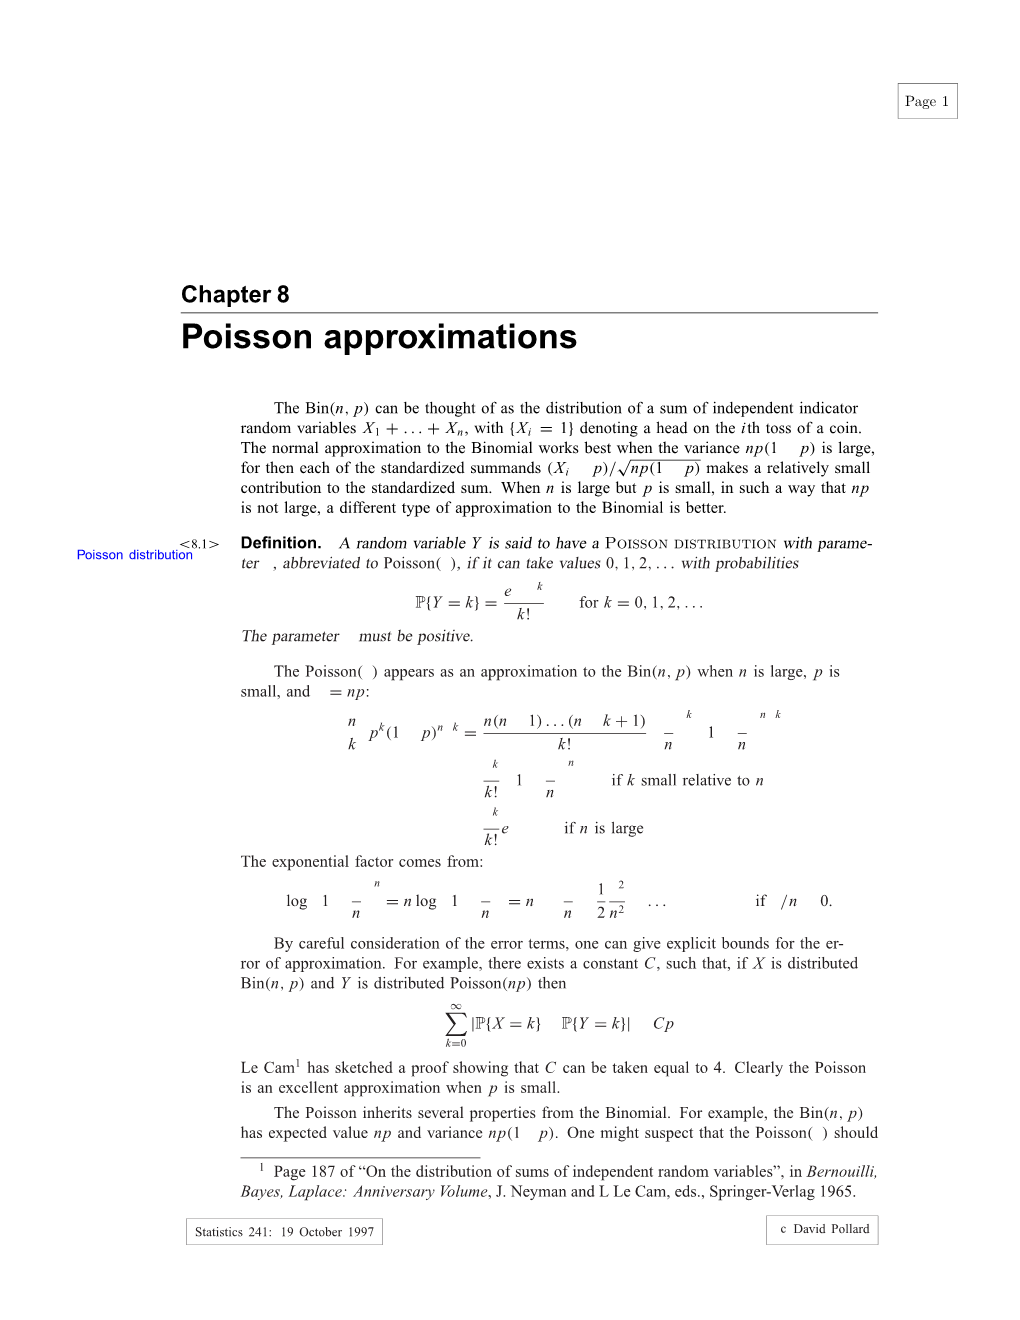 Poisson Approximations